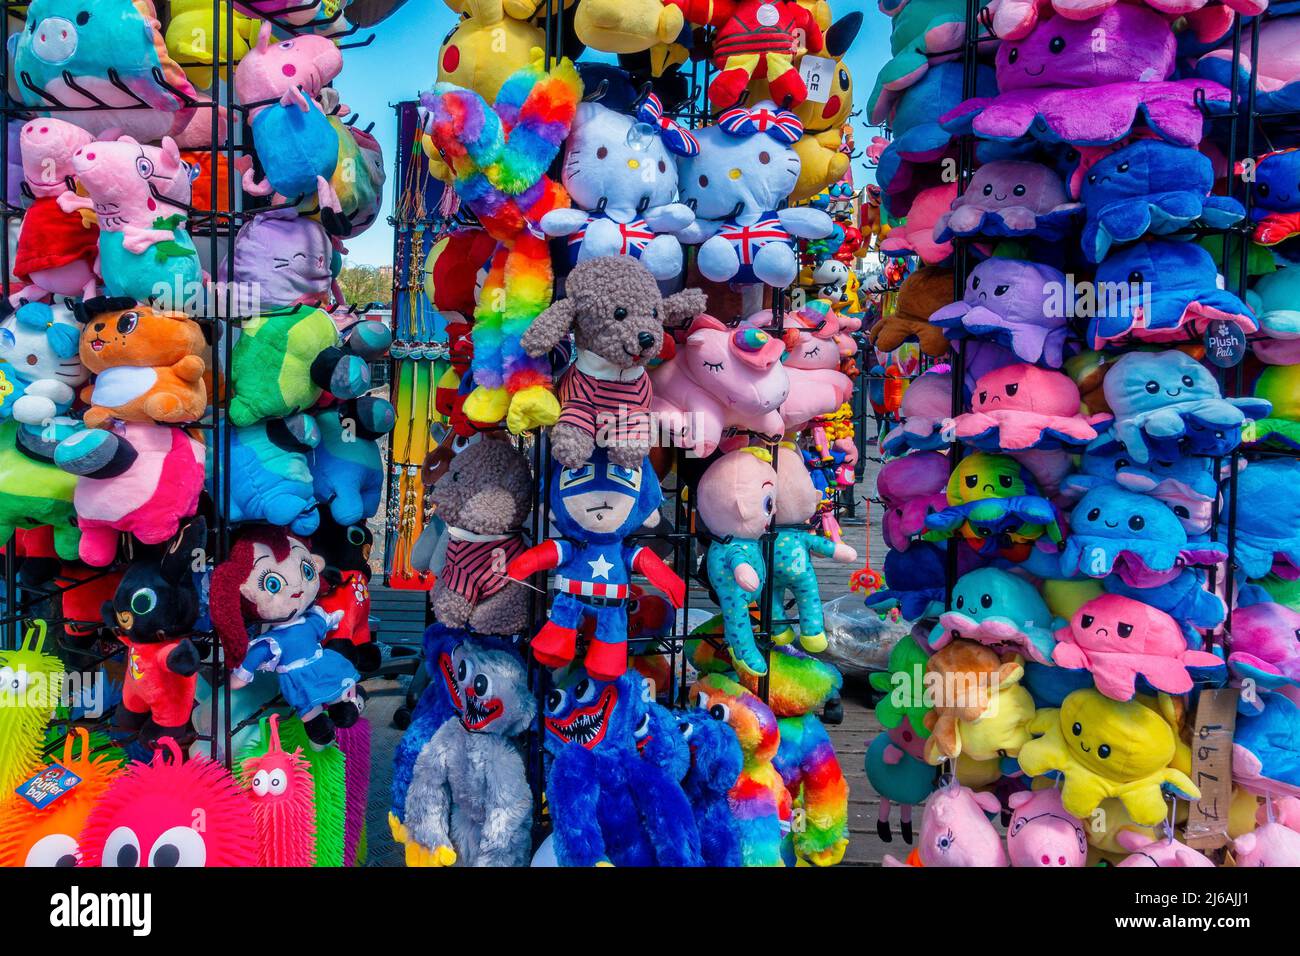 Childrens,Soft Toy,Seaside,Stall,Display,Colourful, Stock Photo